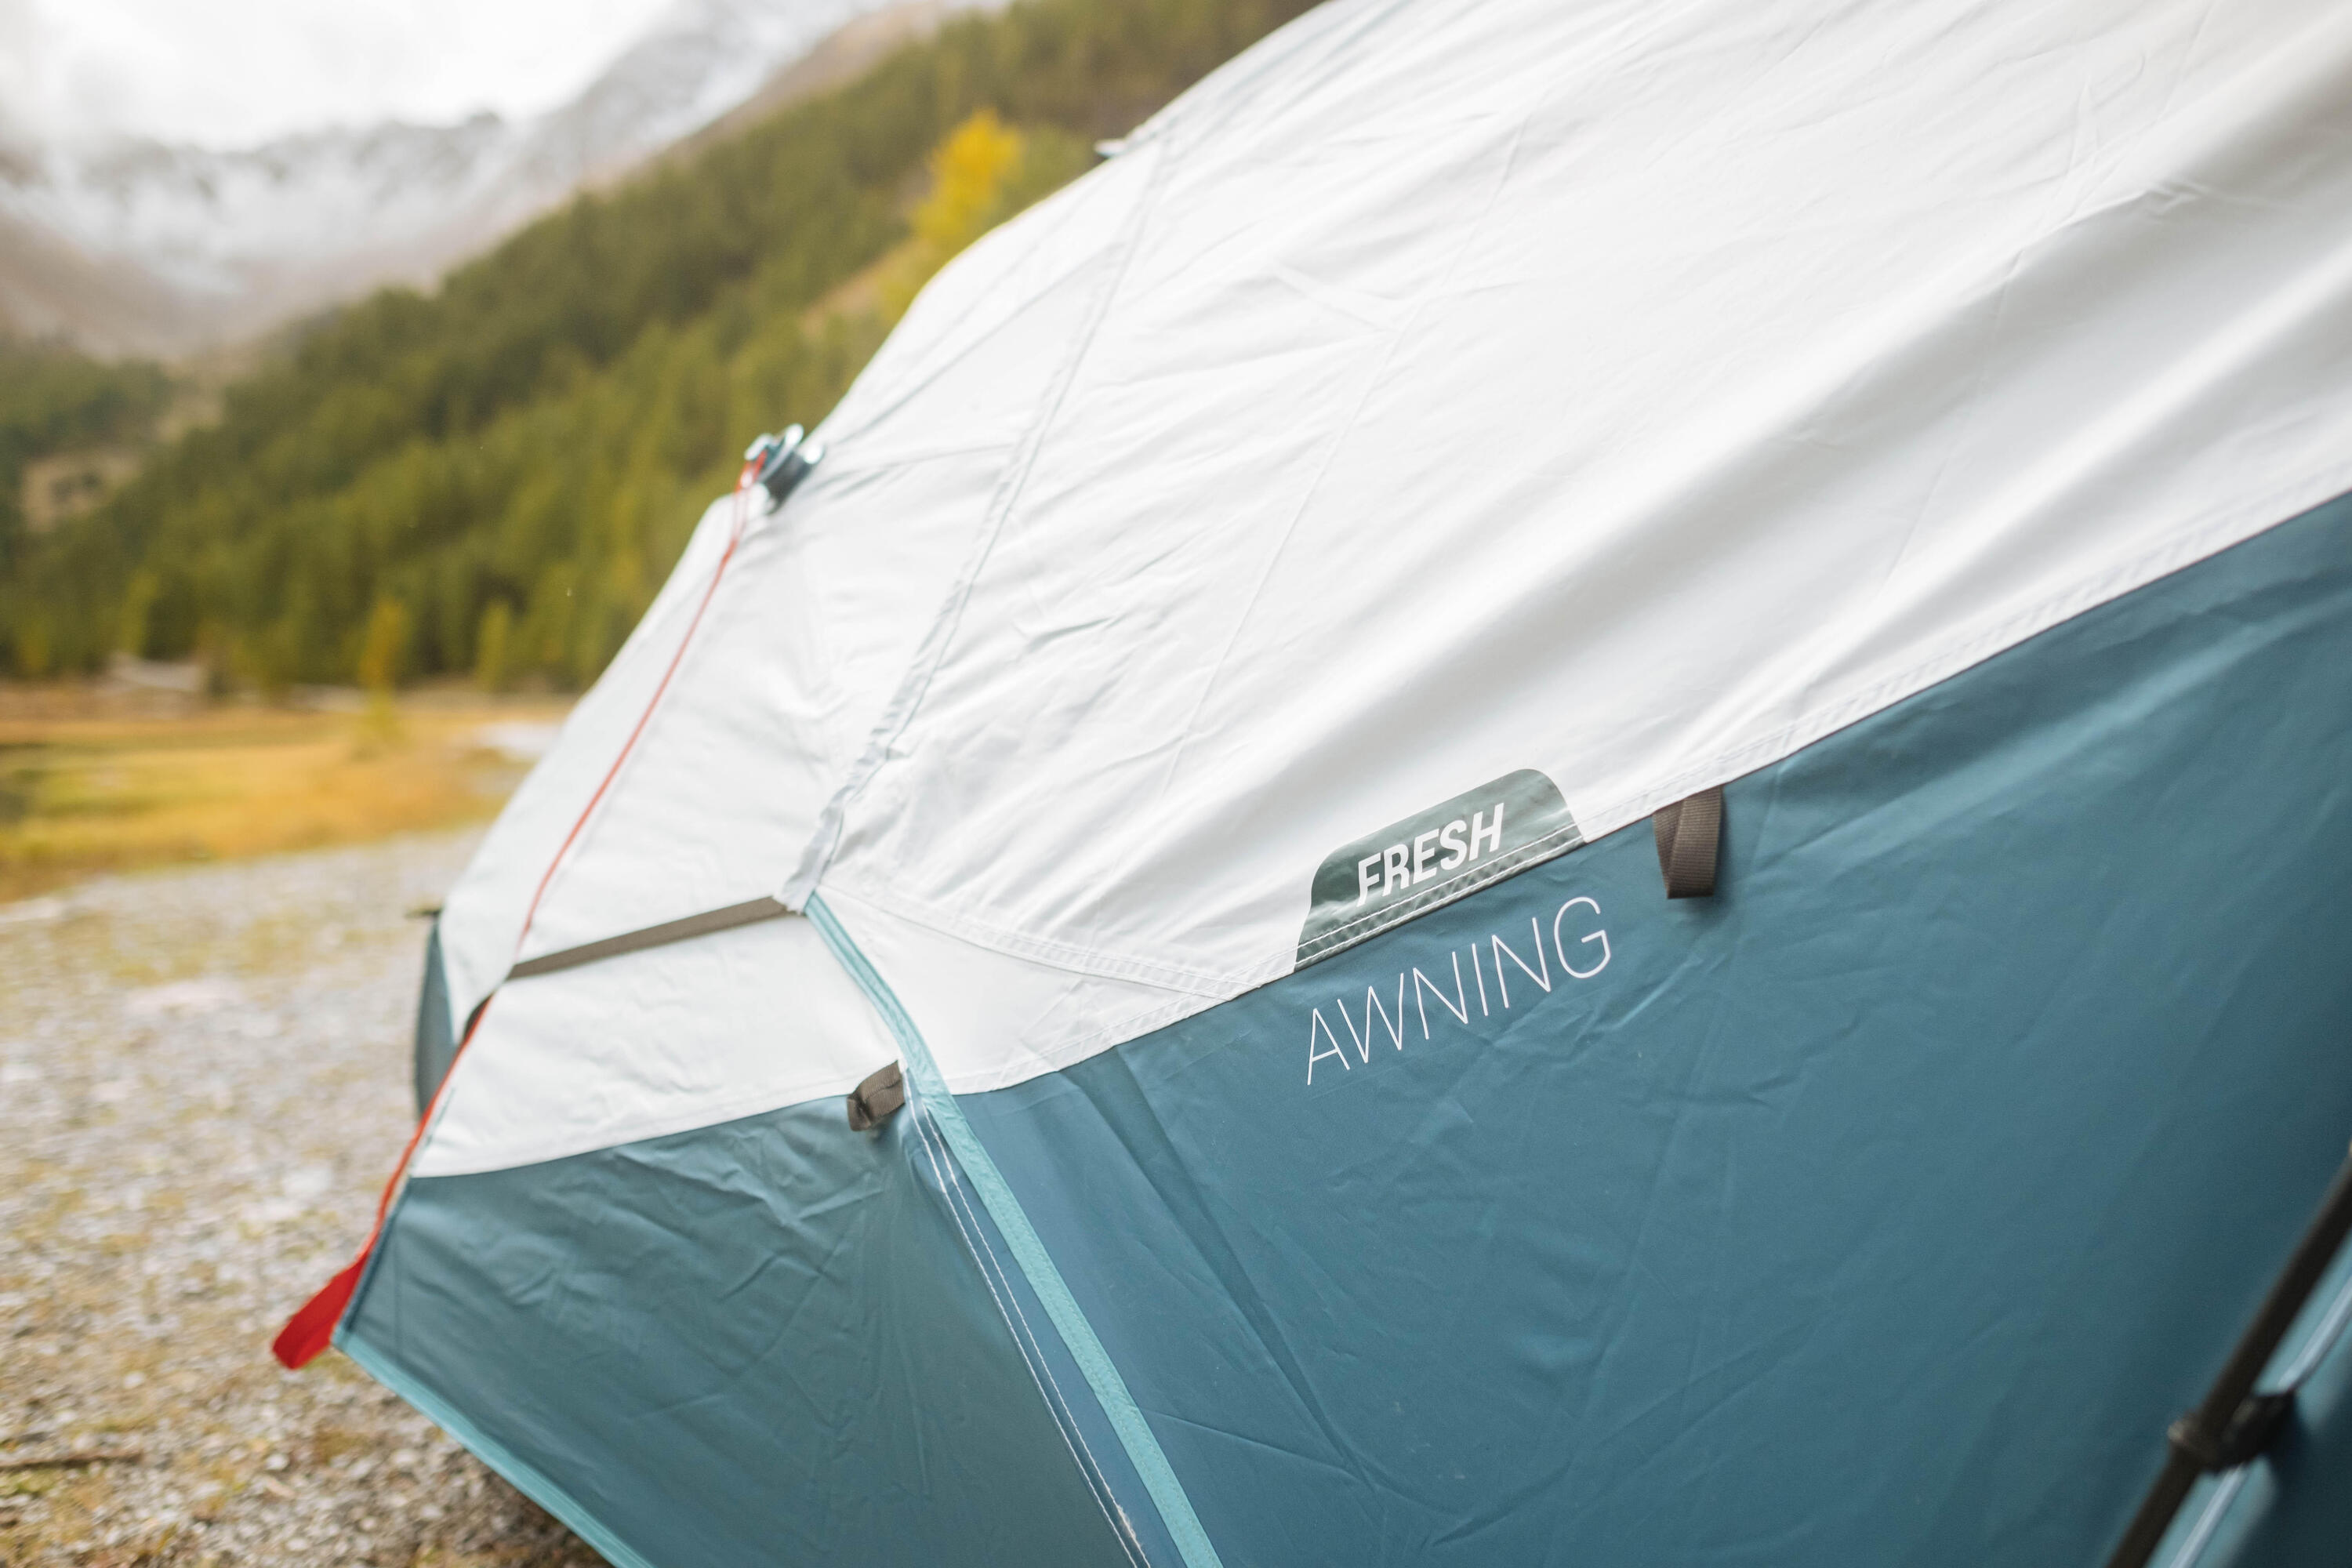 Camping awning - 2 Seconds EASY - Fresh 3/20